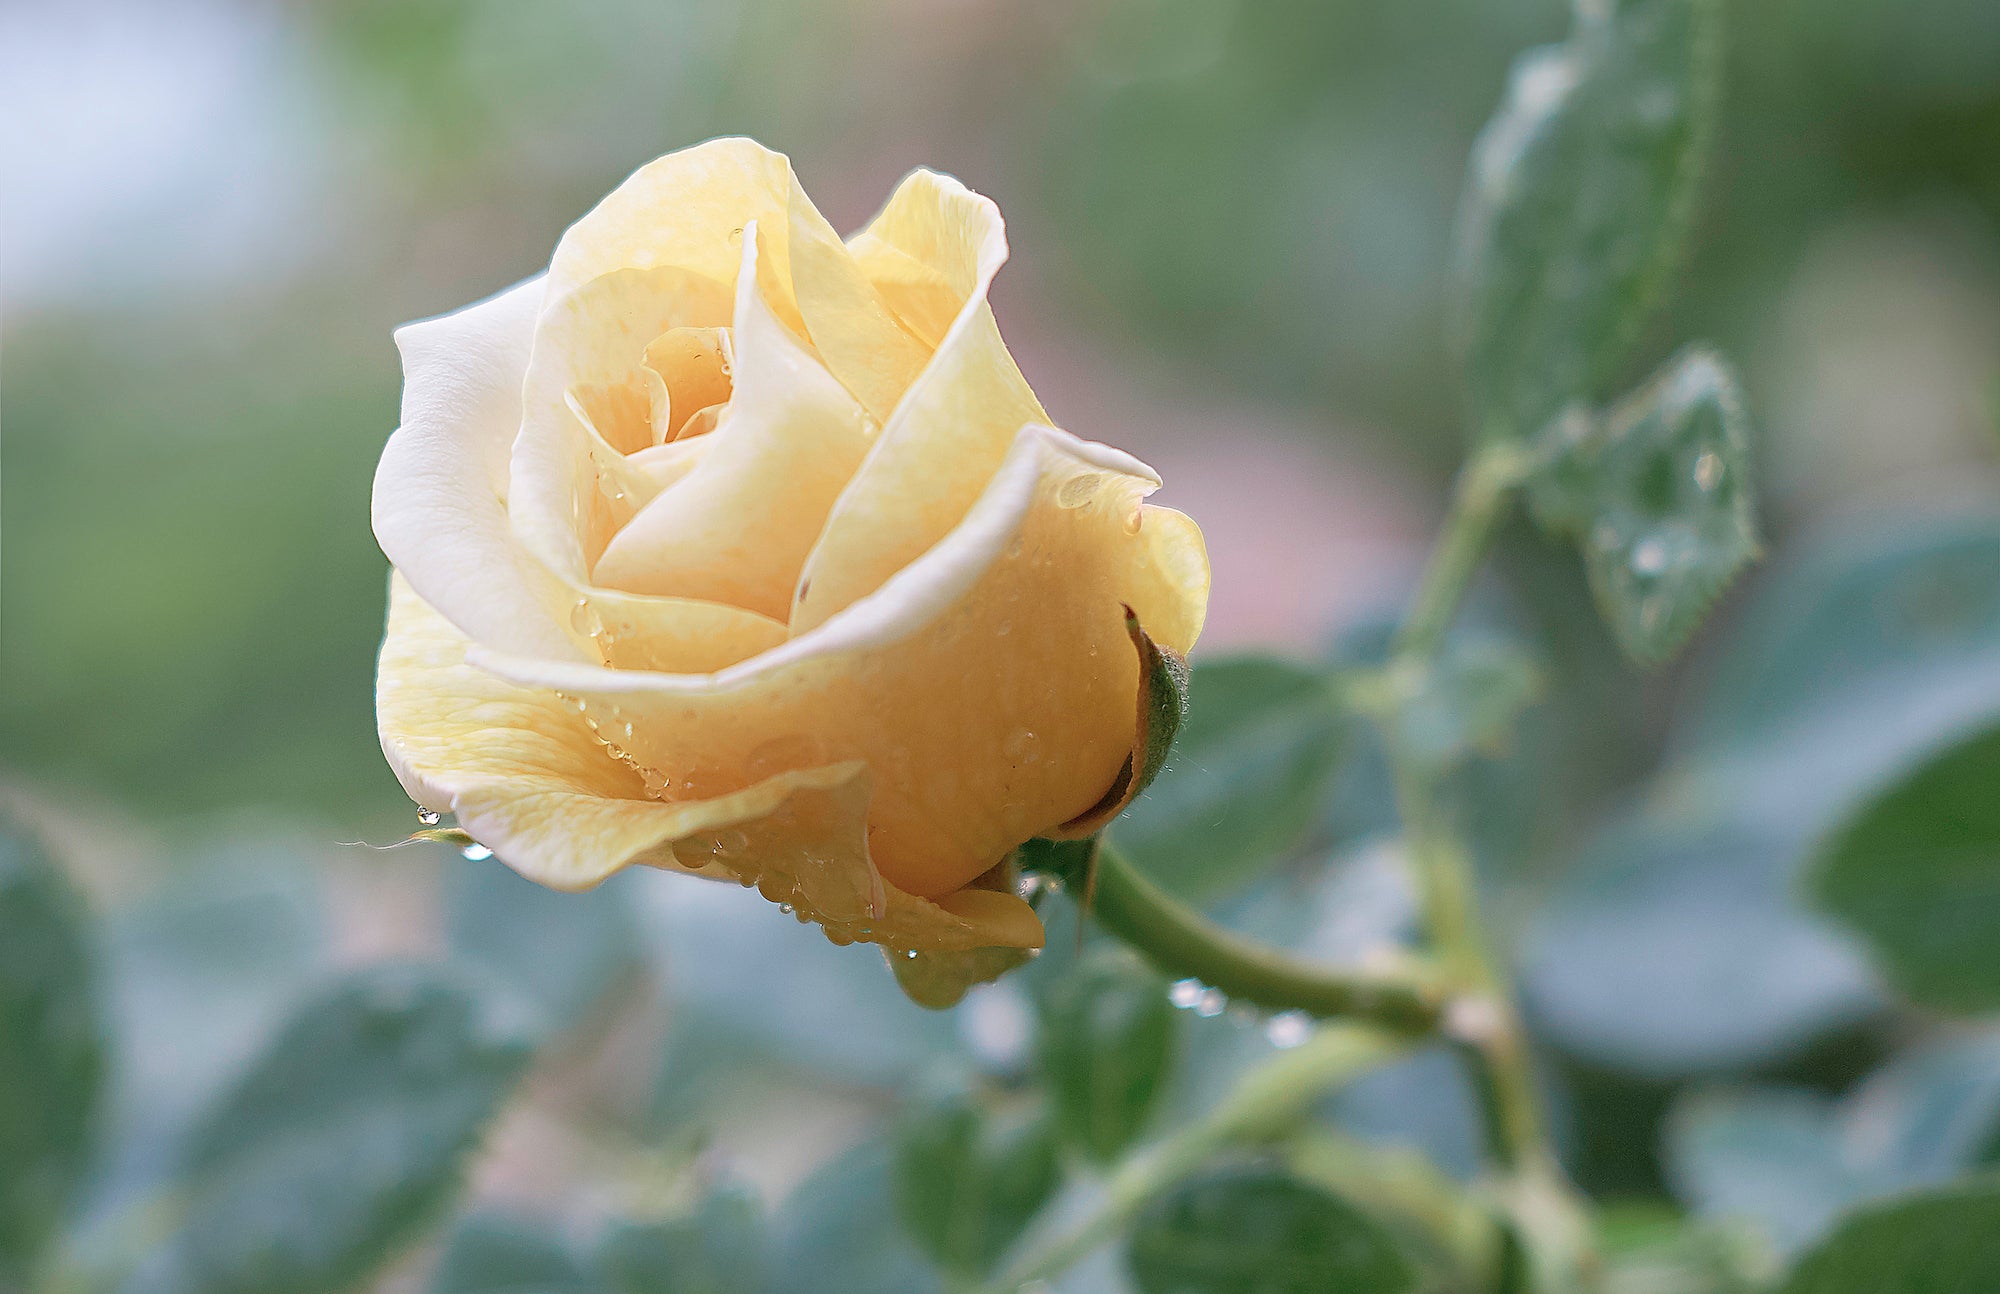 The Sweetheart Rose Has Delicate Pink Blooms With a Honeyed Fragrance